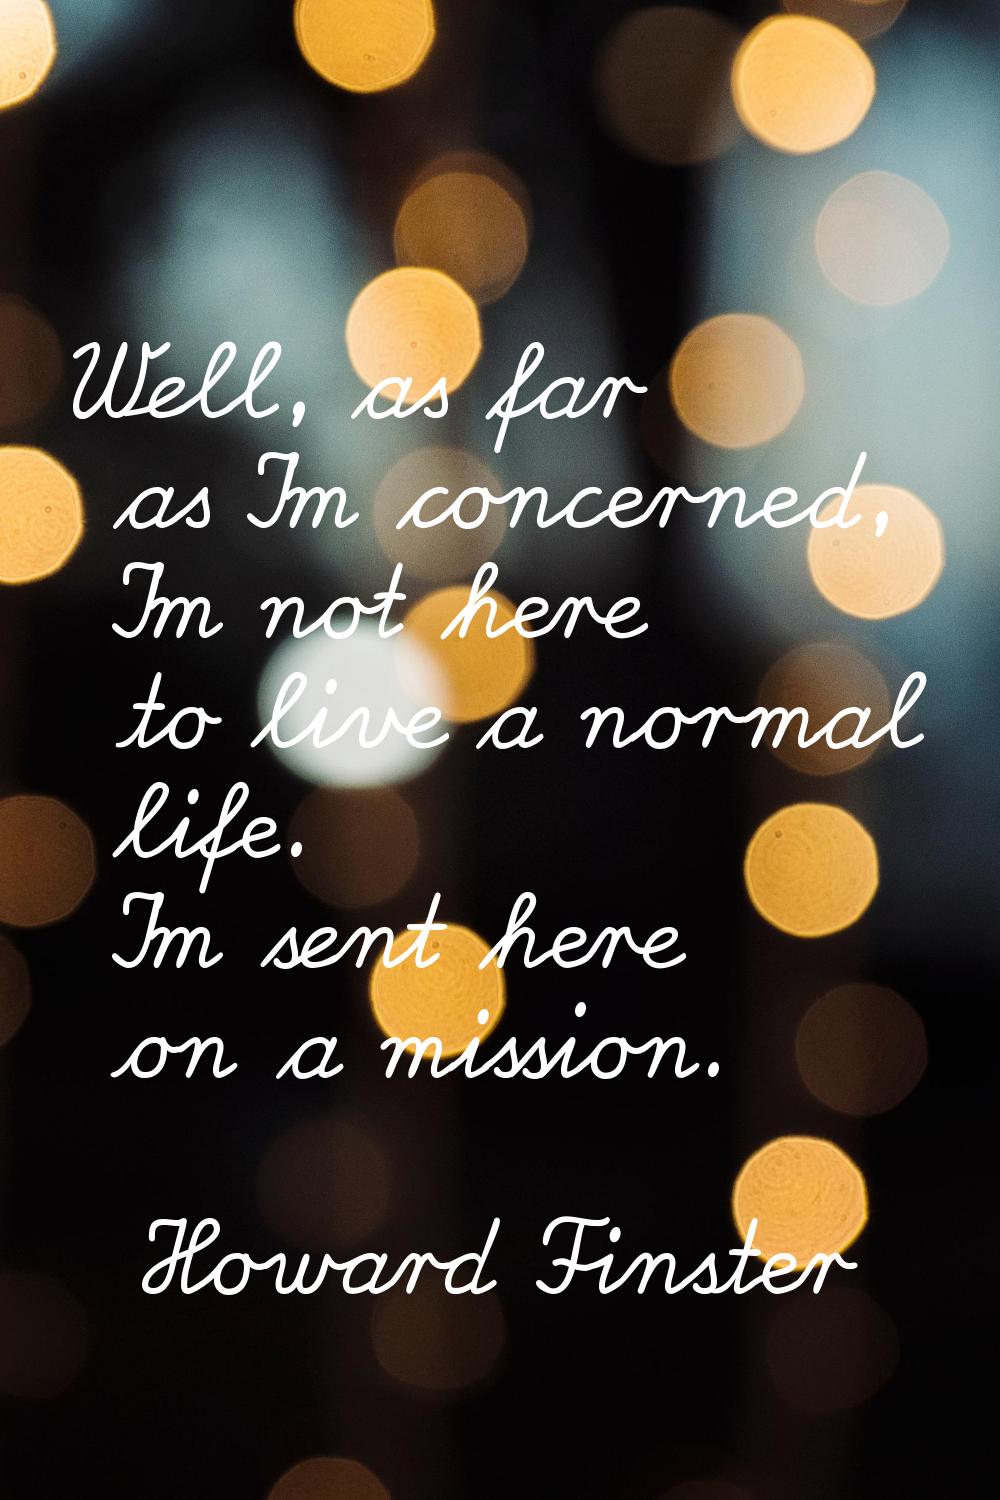 Well, as far as I'm concerned, I'm not here to live a normal life. I'm sent here on a mission.